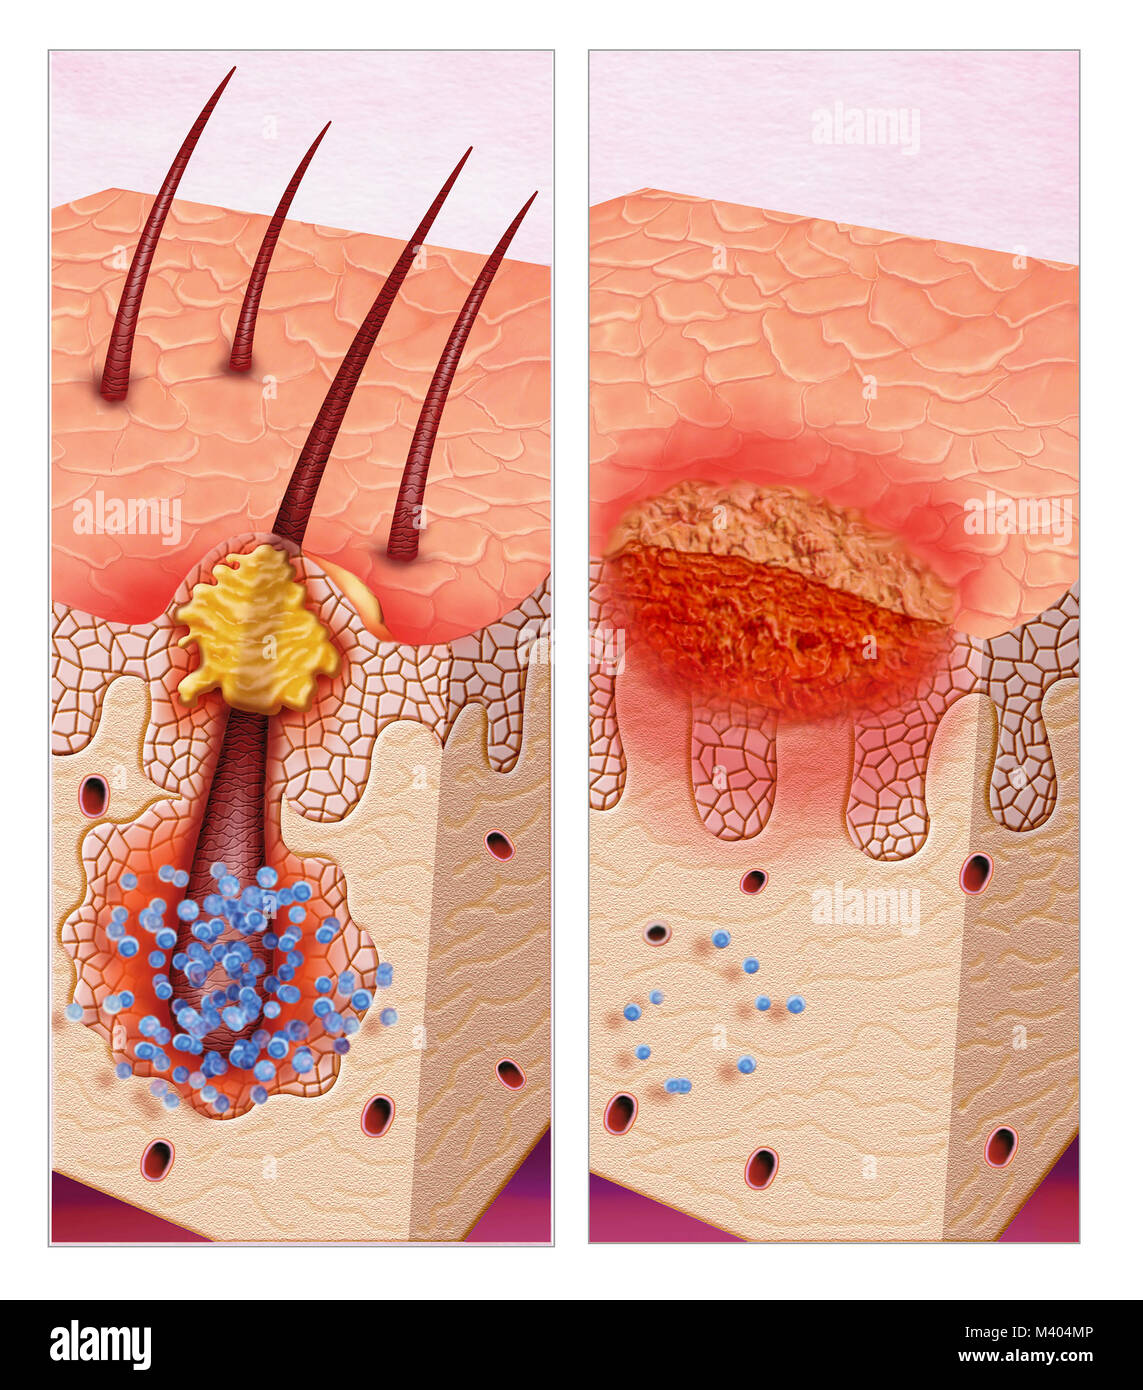 Illustration about skin infections Stock Photo